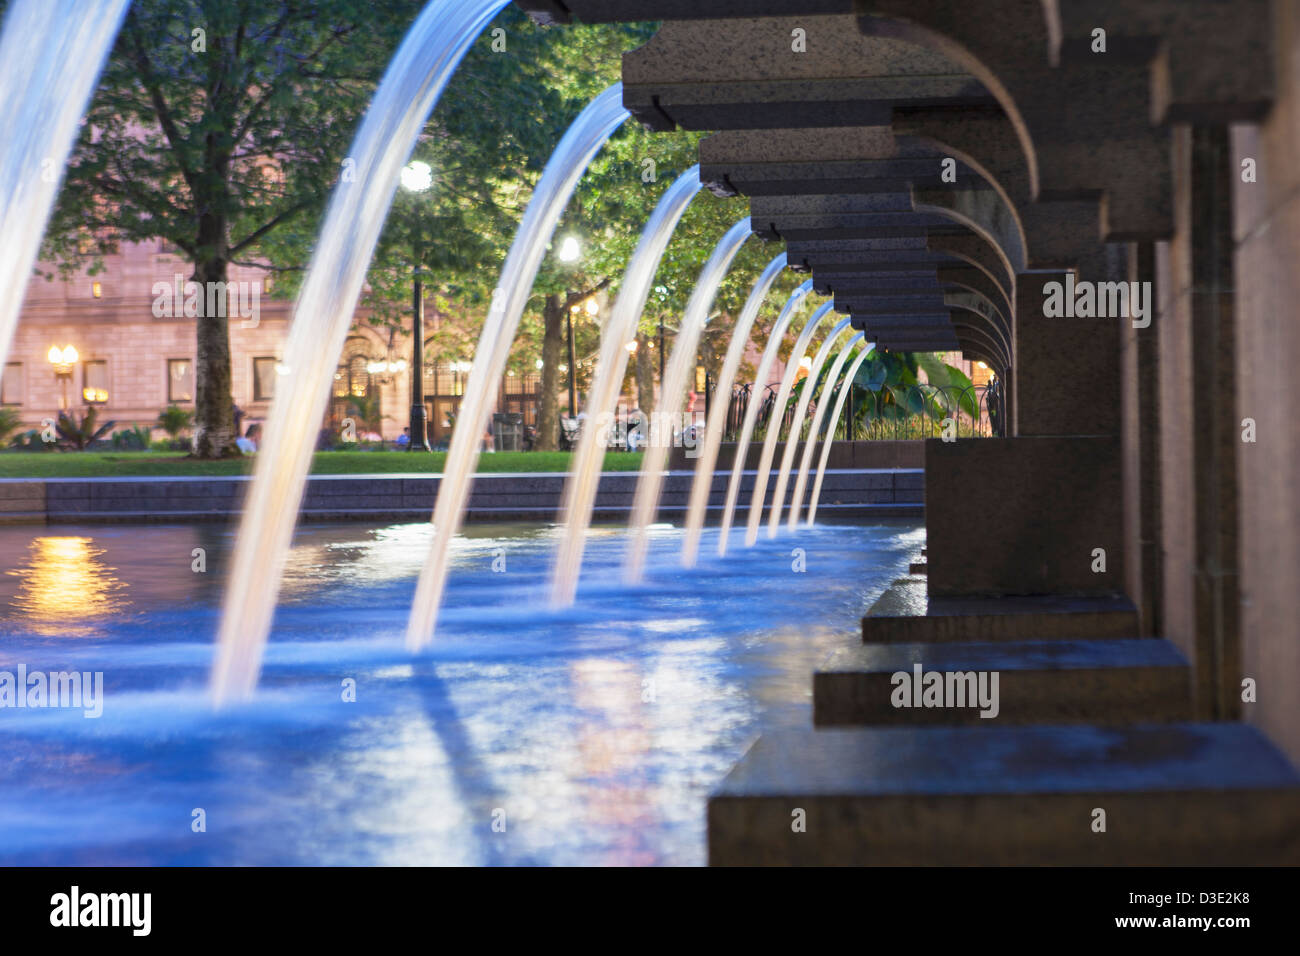 water-falling-from-a-fountain-copley-square-back-bay-boston